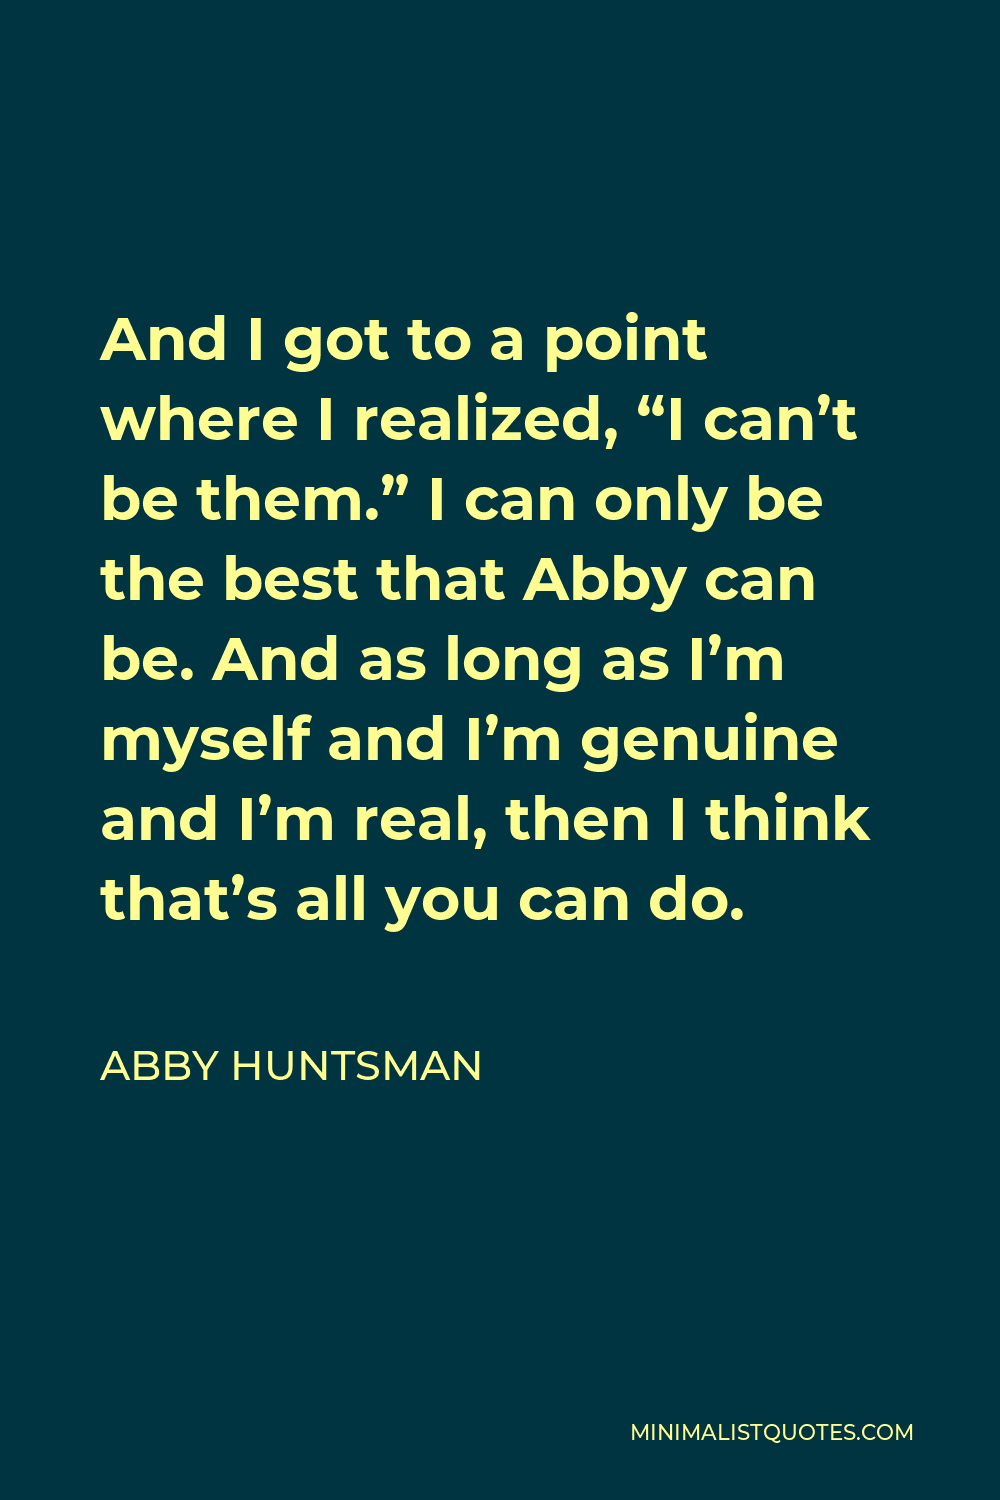 Abby Huntsman Quote - And I got to a point where I realized, “I can’t be them.” I can only be the best that Abby can be. And as long as I’m myself and I’m genuine and I’m real, then I think that’s all you can do.